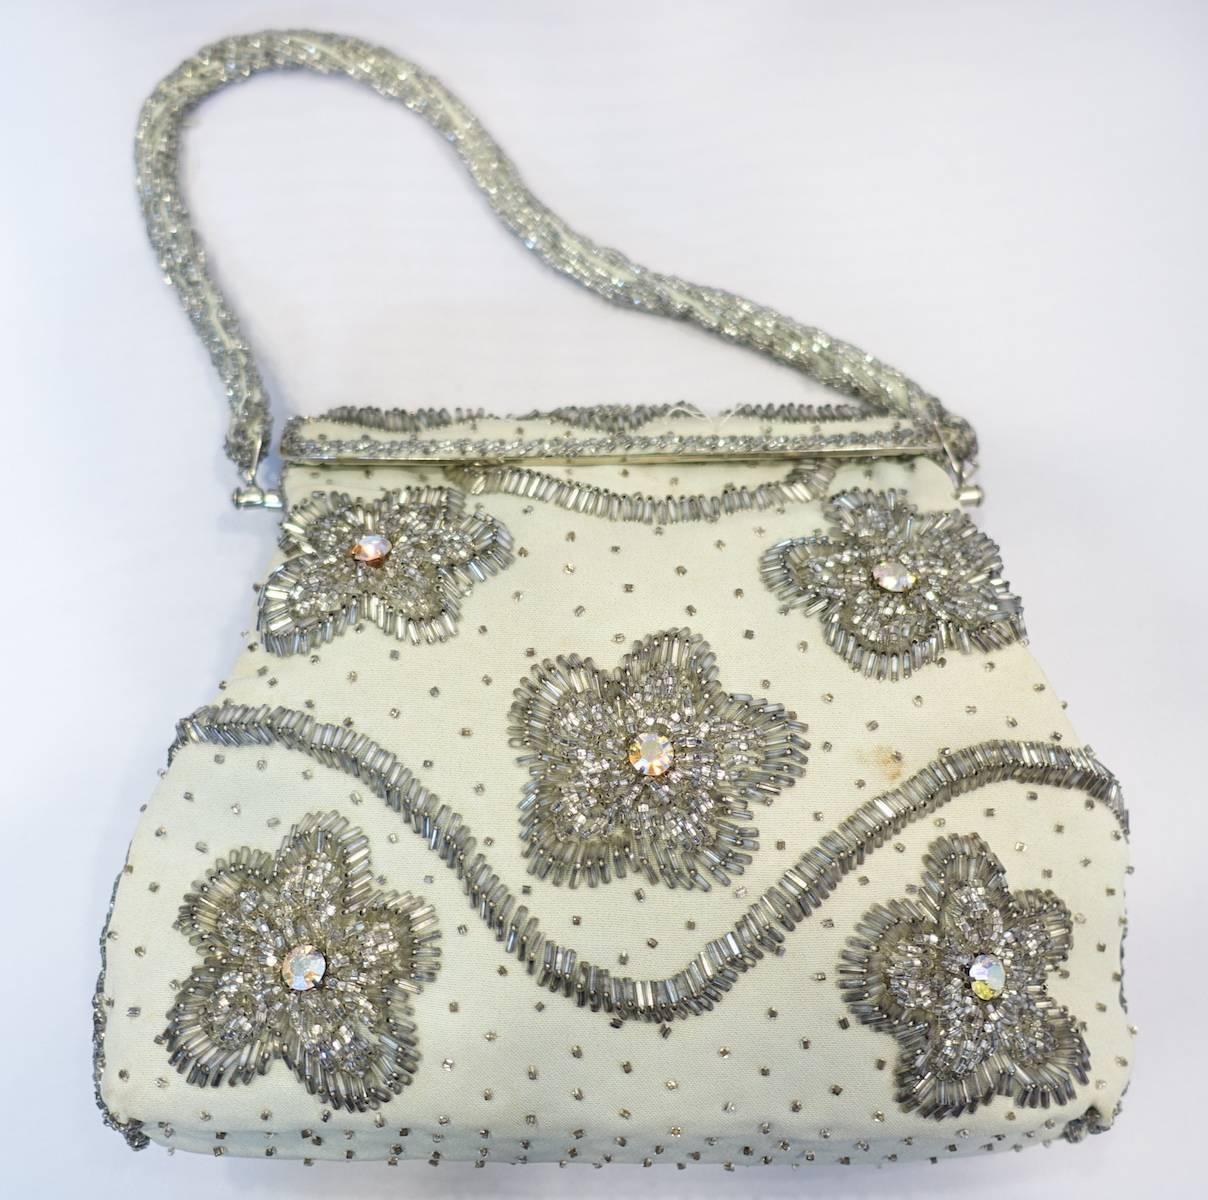 This beautiful1960s hand bag is handmade and consists of gray & clear beads with aurora borealis stone accents on crème color cotton.  This handbag measures 7” high x 8-1/2” wide with a fold-over closure. The beaded strap is 5.5” up from center. 